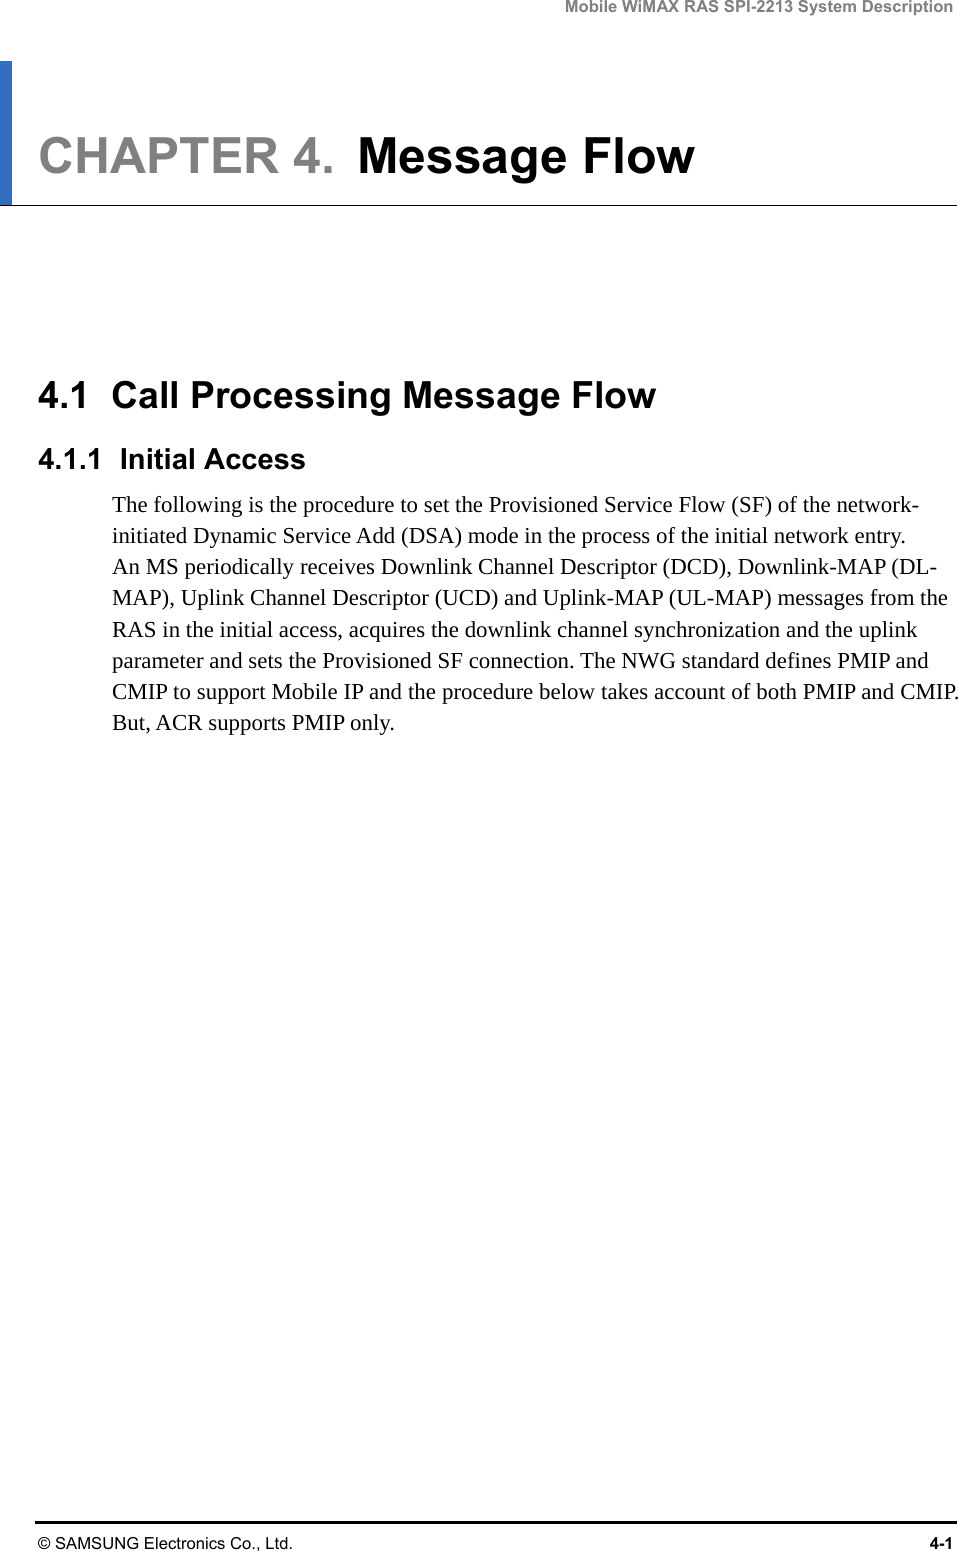 Mobile WiMAX RAS SPI-2213 System Description © SAMSUNG Electronics Co., Ltd.  4-1 CHAPTER 4.  Message Flow      4.1  Call Processing Message Flow 4.1.1 Initial Access The following is the procedure to set the Provisioned Service Flow (SF) of the network-initiated Dynamic Service Add (DSA) mode in the process of the initial network entry. An MS periodically receives Downlink Channel Descriptor (DCD), Downlink-MAP (DL-MAP), Uplink Channel Descriptor (UCD) and Uplink-MAP (UL-MAP) messages from the RAS in the initial access, acquires the downlink channel synchronization and the uplink parameter and sets the Provisioned SF connection. The NWG standard defines PMIP and CMIP to support Mobile IP and the procedure below takes account of both PMIP and CMIP. But, ACR supports PMIP only.